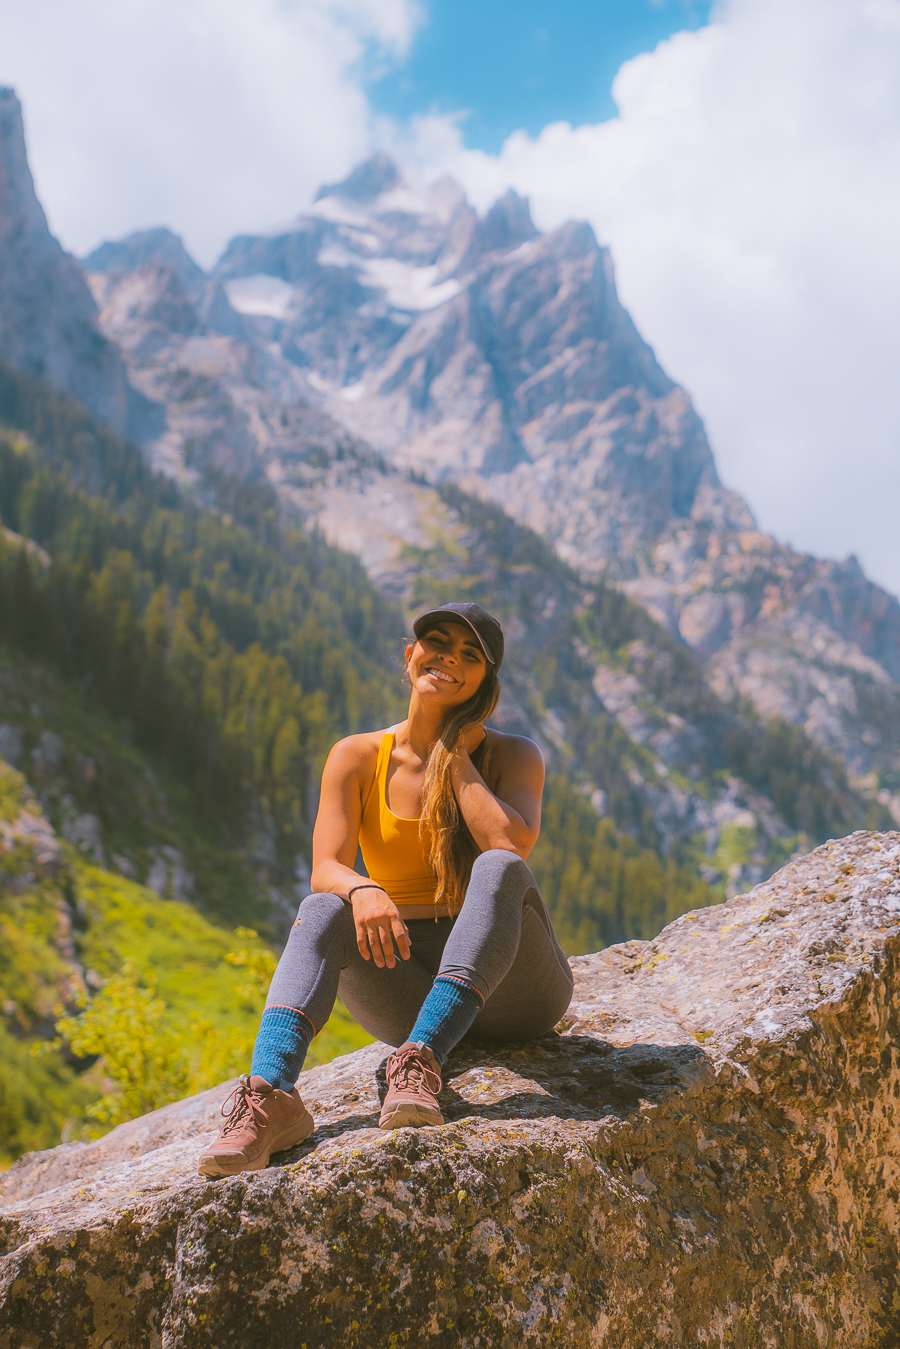 What to Wear Hiking: 5 Features to Look for in Hiking Clothes